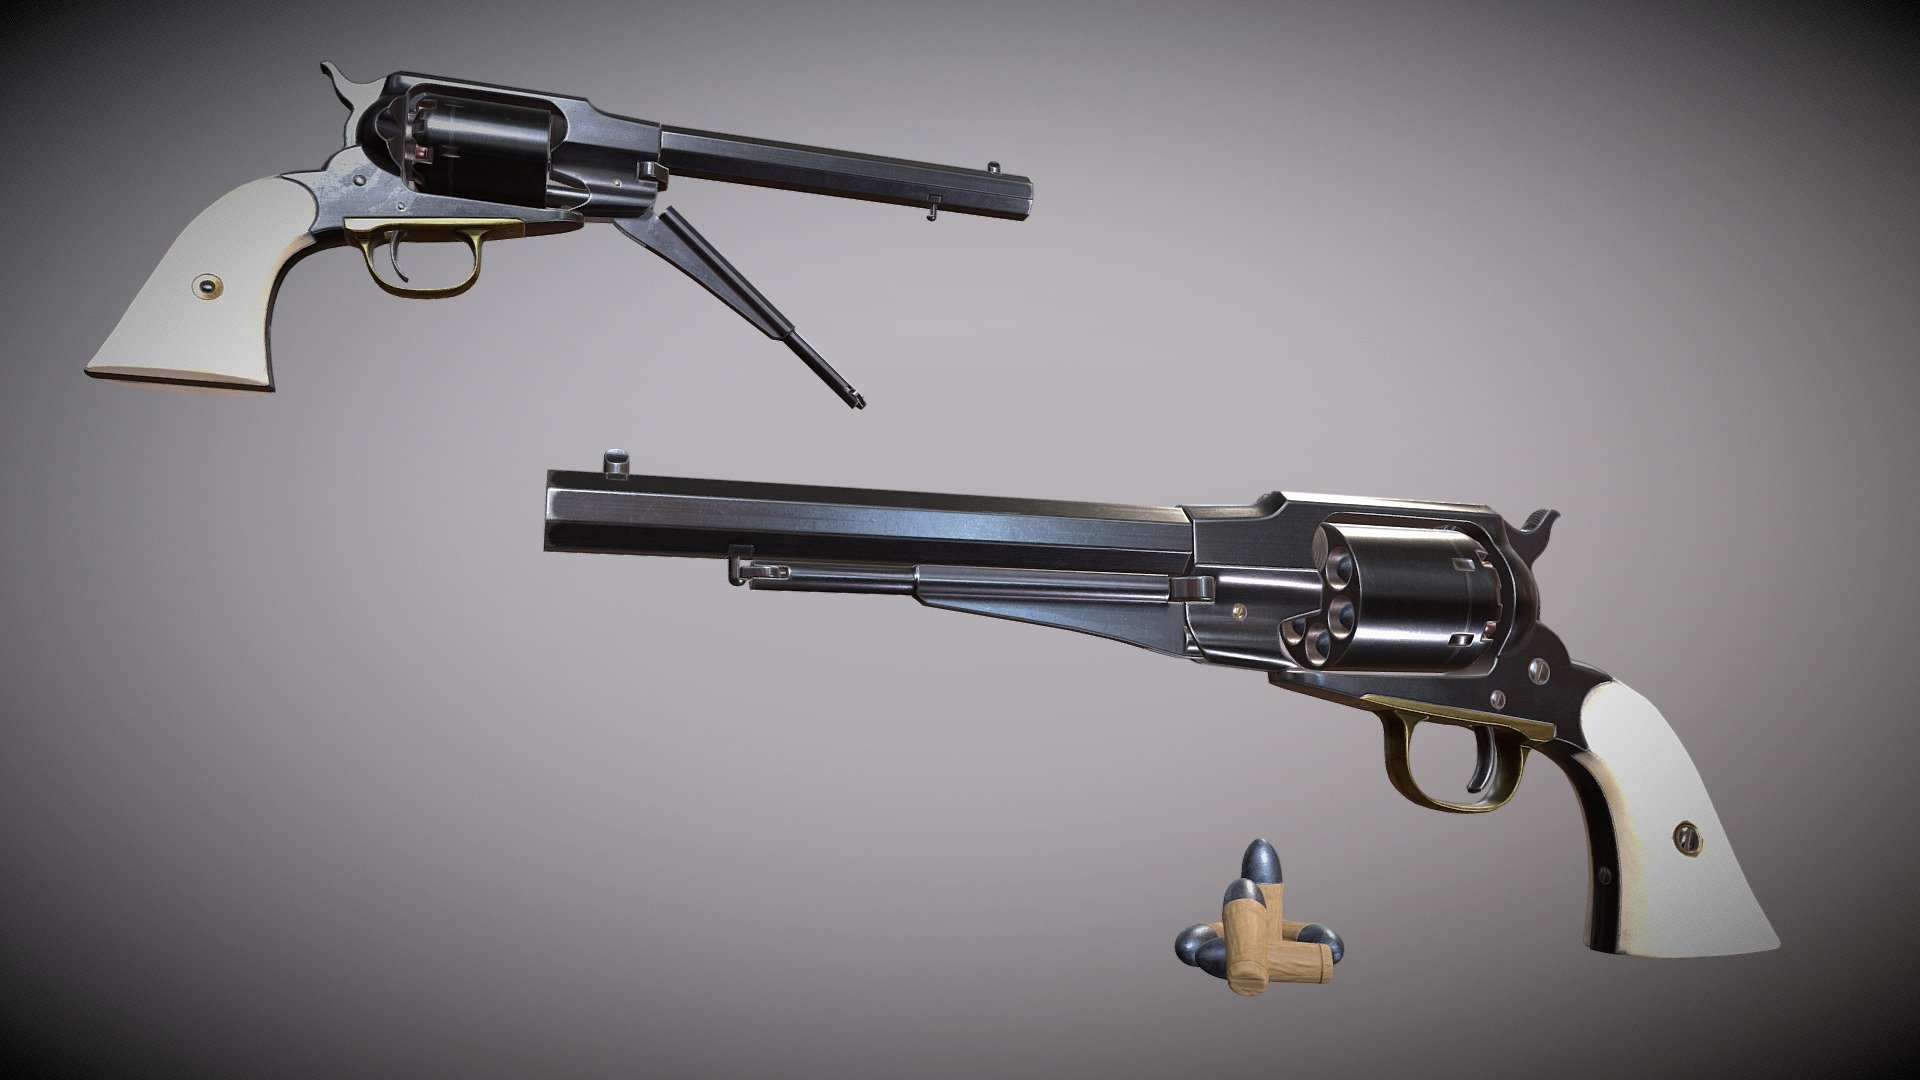 Remington New Model .44 (Army) caliber, used during the American Civil War, and was the beginning of a successful line of medium and large frame pistols
Textures 4k PBR Metallic Roughness

high poly modeling done in blender and ZBrush

Low poly done in blender

Textured in Substance painter, baked and rendered using Marmoset Toolbag 4 - Remington 1858 - Buy Royalty Free 3D model by Wallerion 3d model